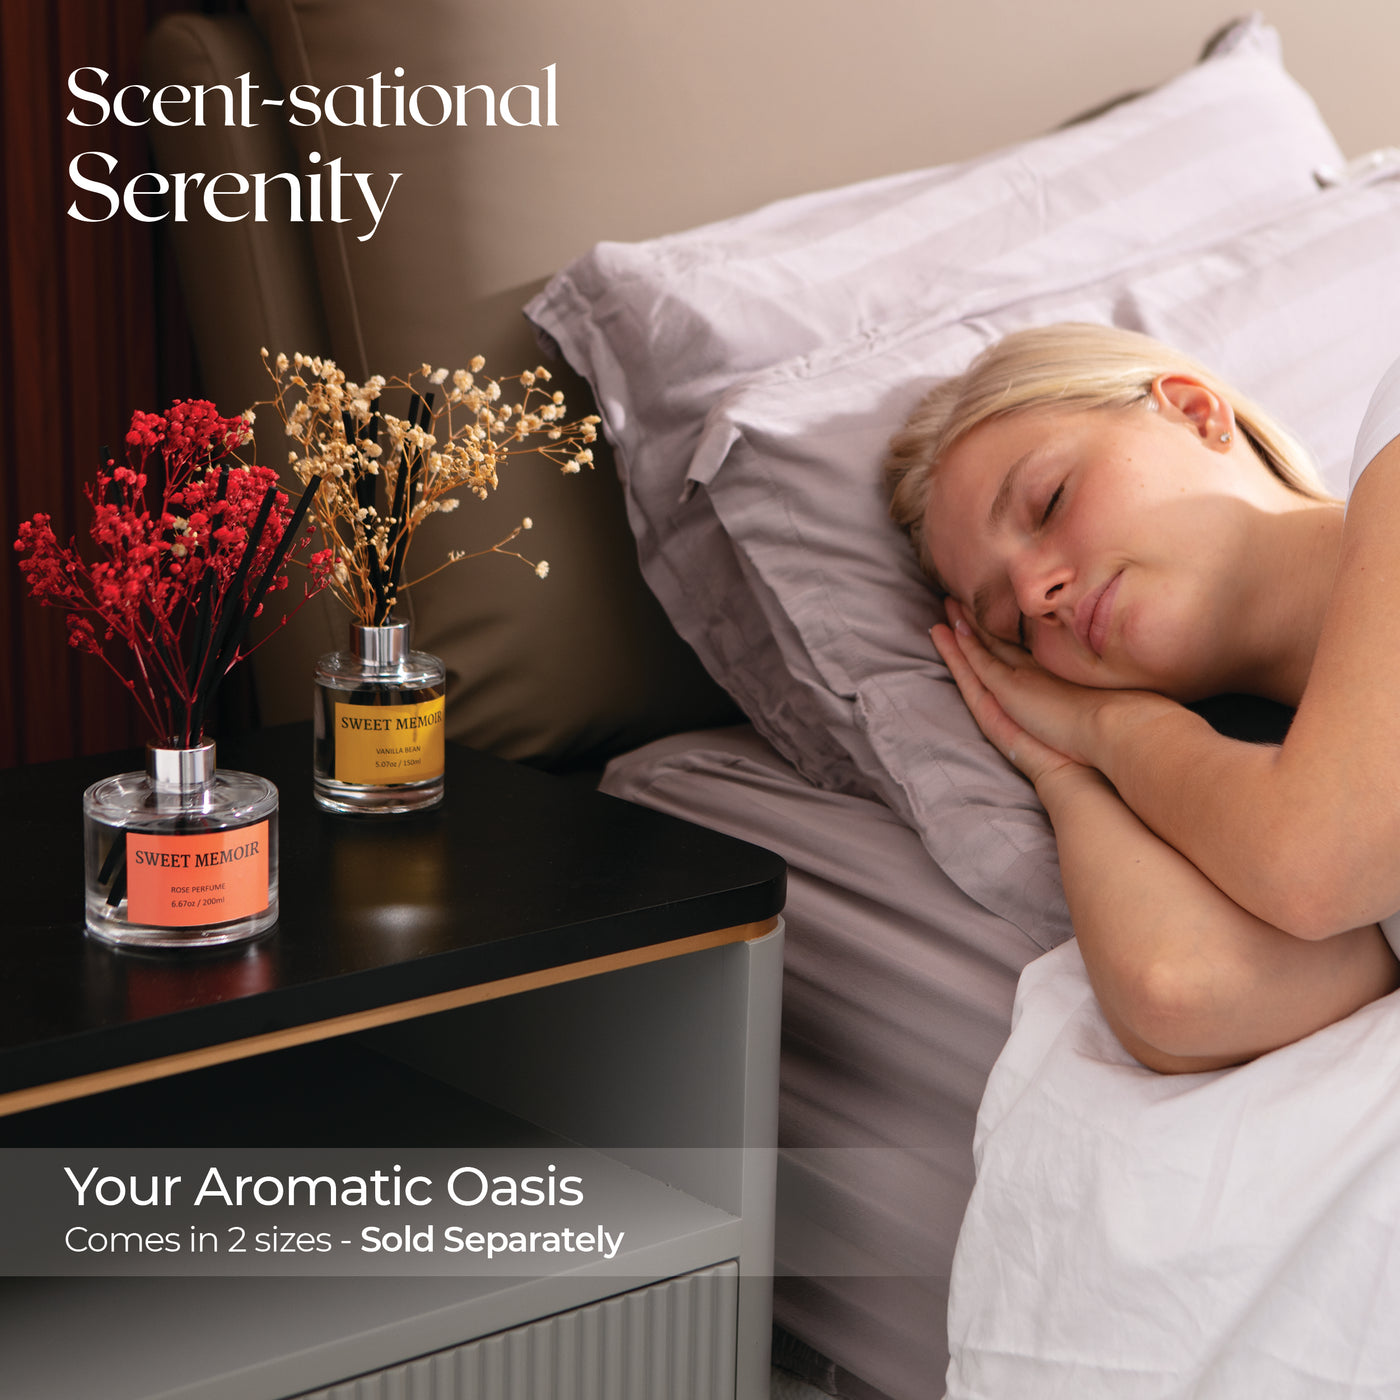 Cozy bedroom scene with a Sweet Memoir reed diffuser on the bedside table, enhancing a restful sleep environment.